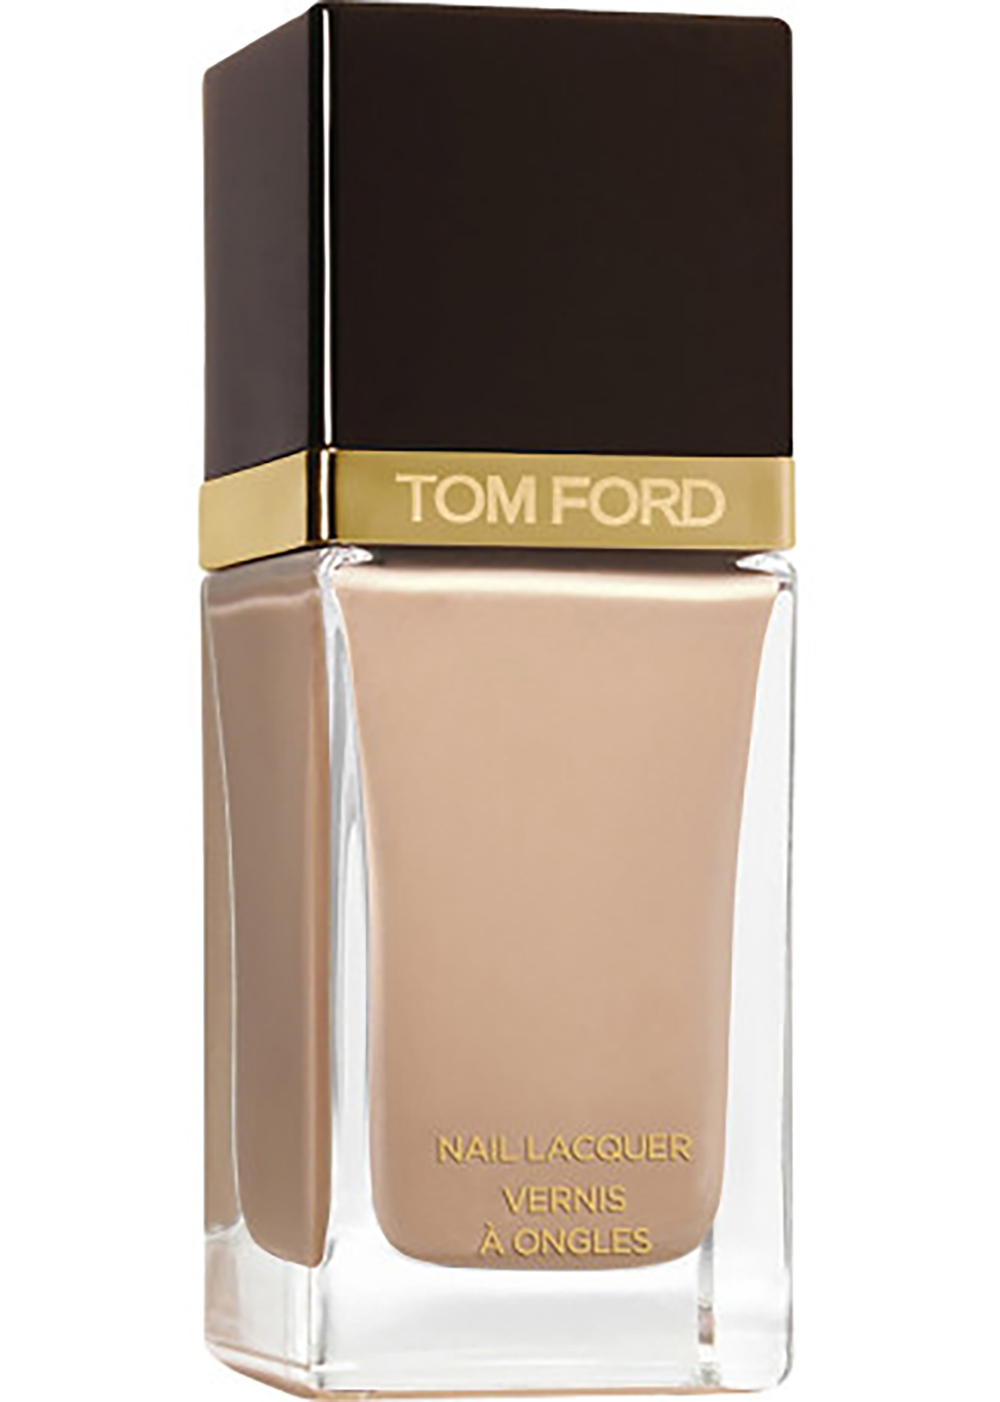 Tom Ford nail lacquer